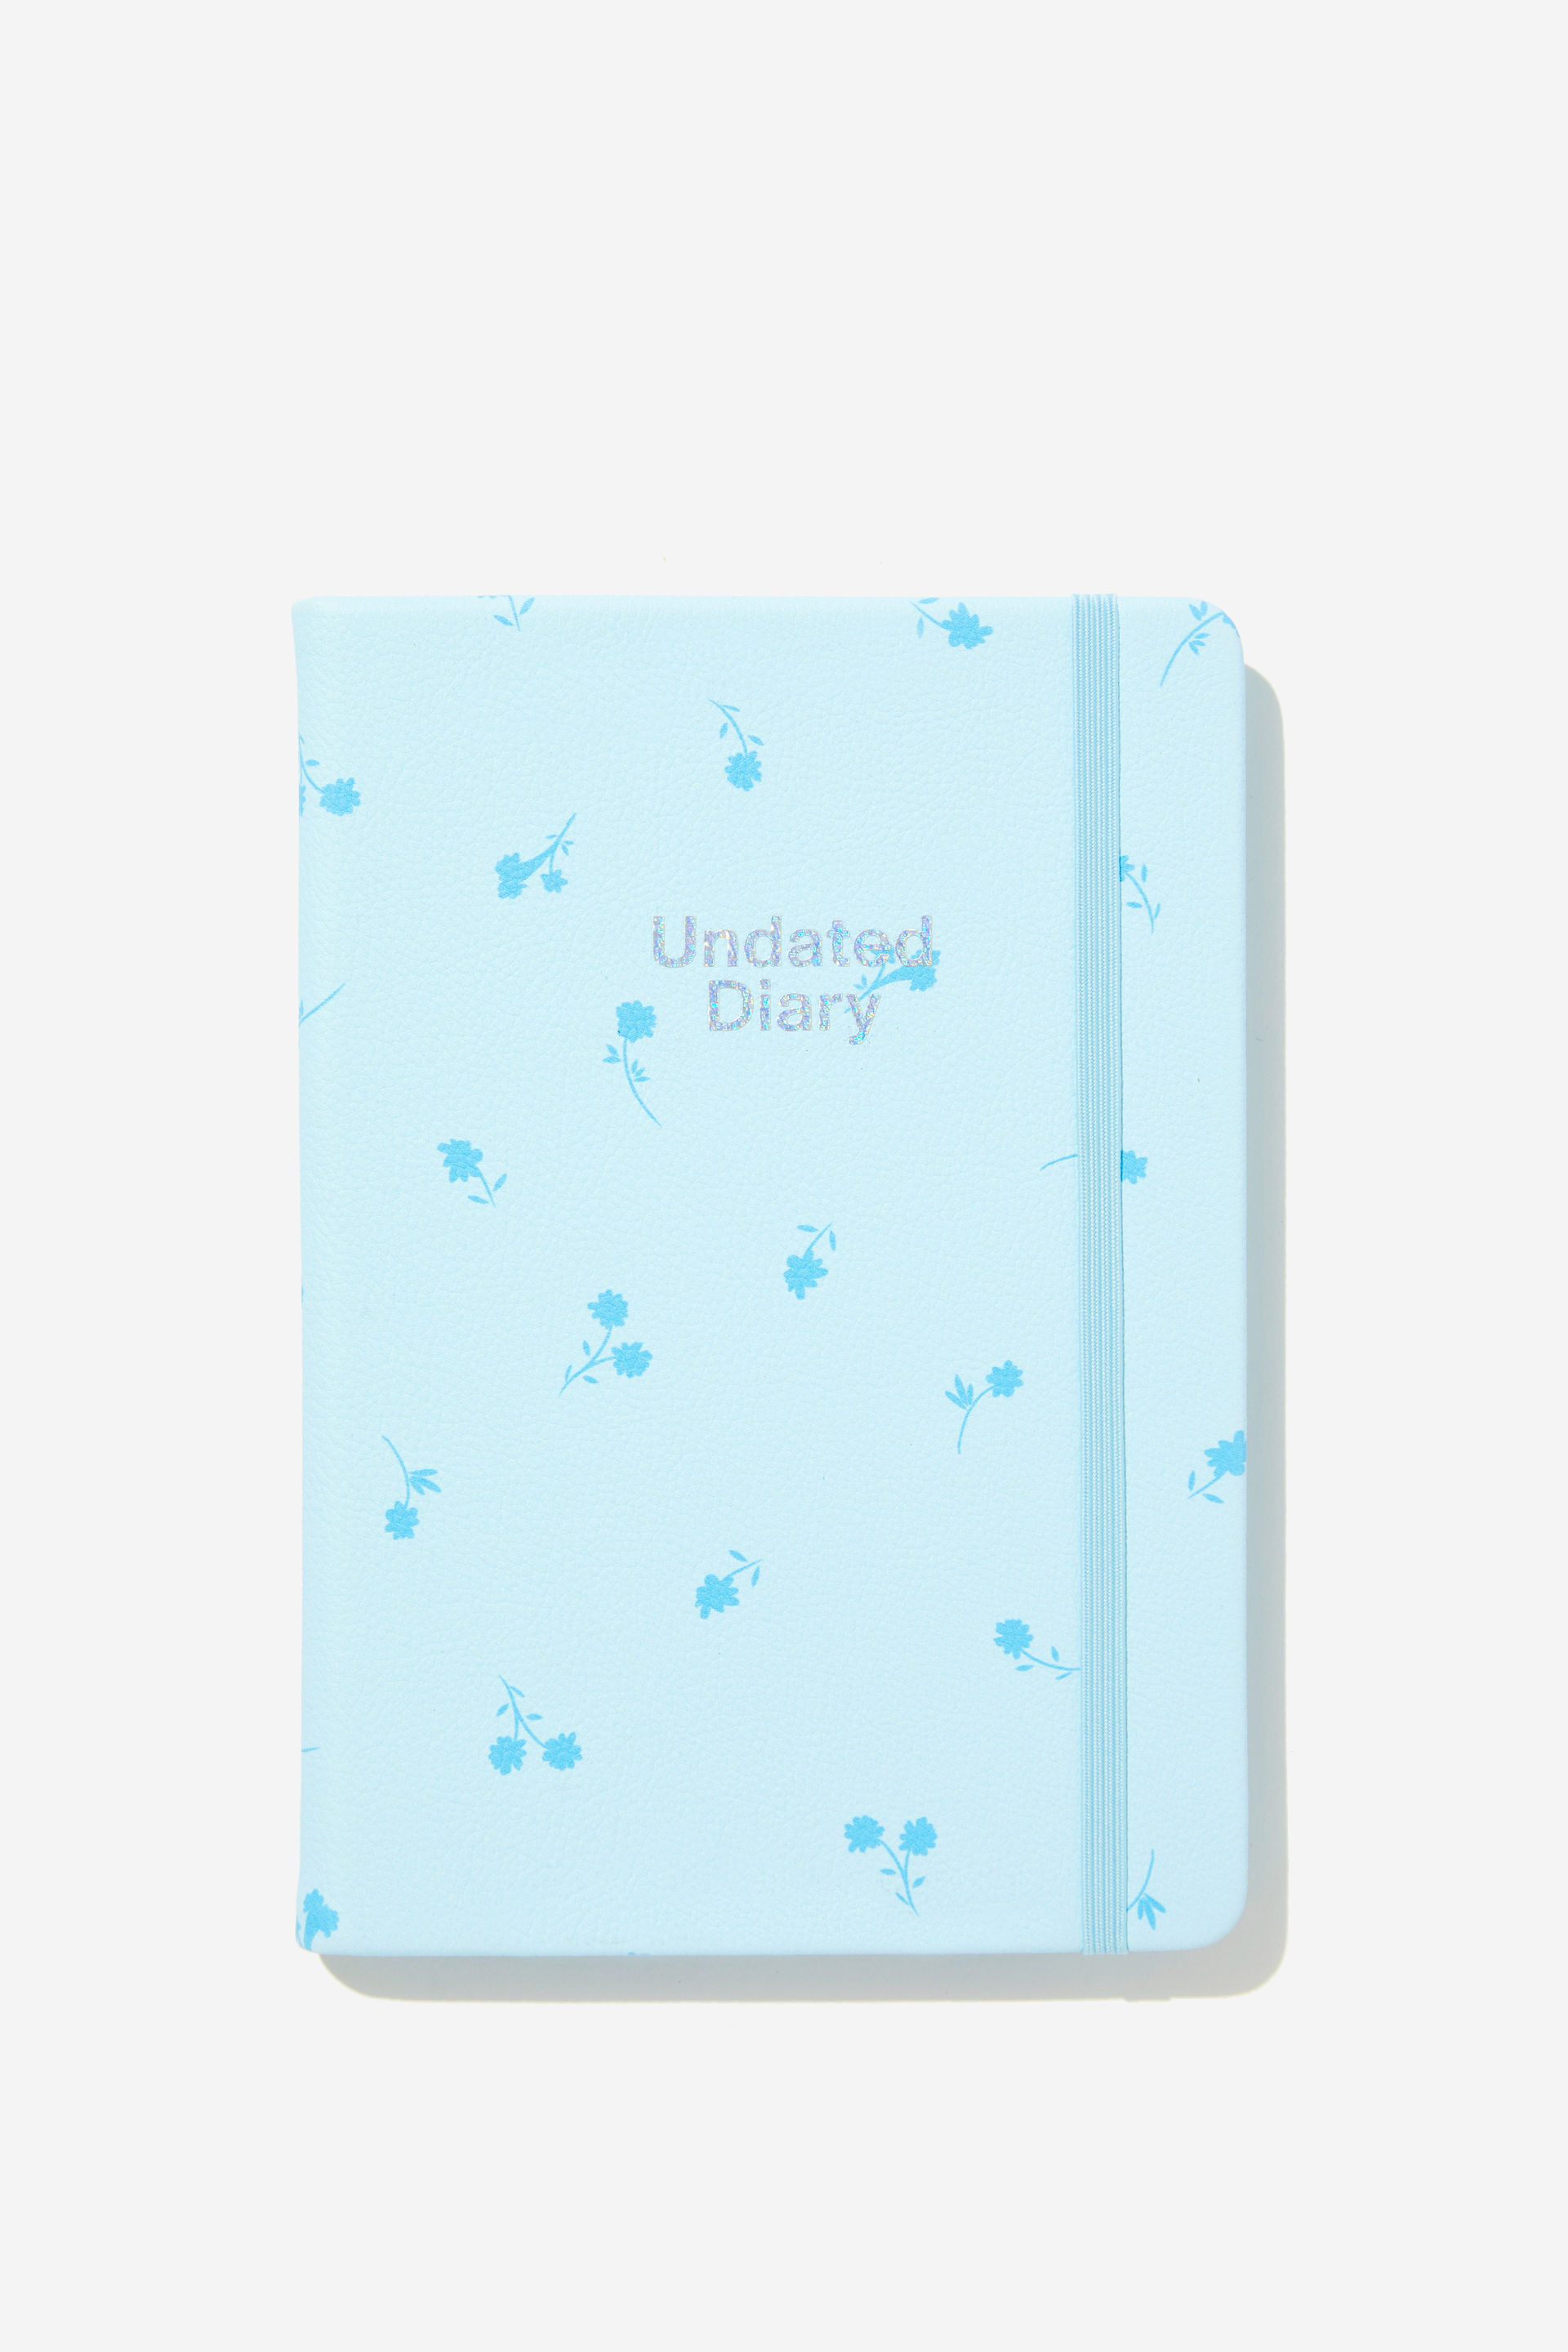 Typo - A5 Undated Weekly Buffalo Diary - Arctic blue ditsy floral